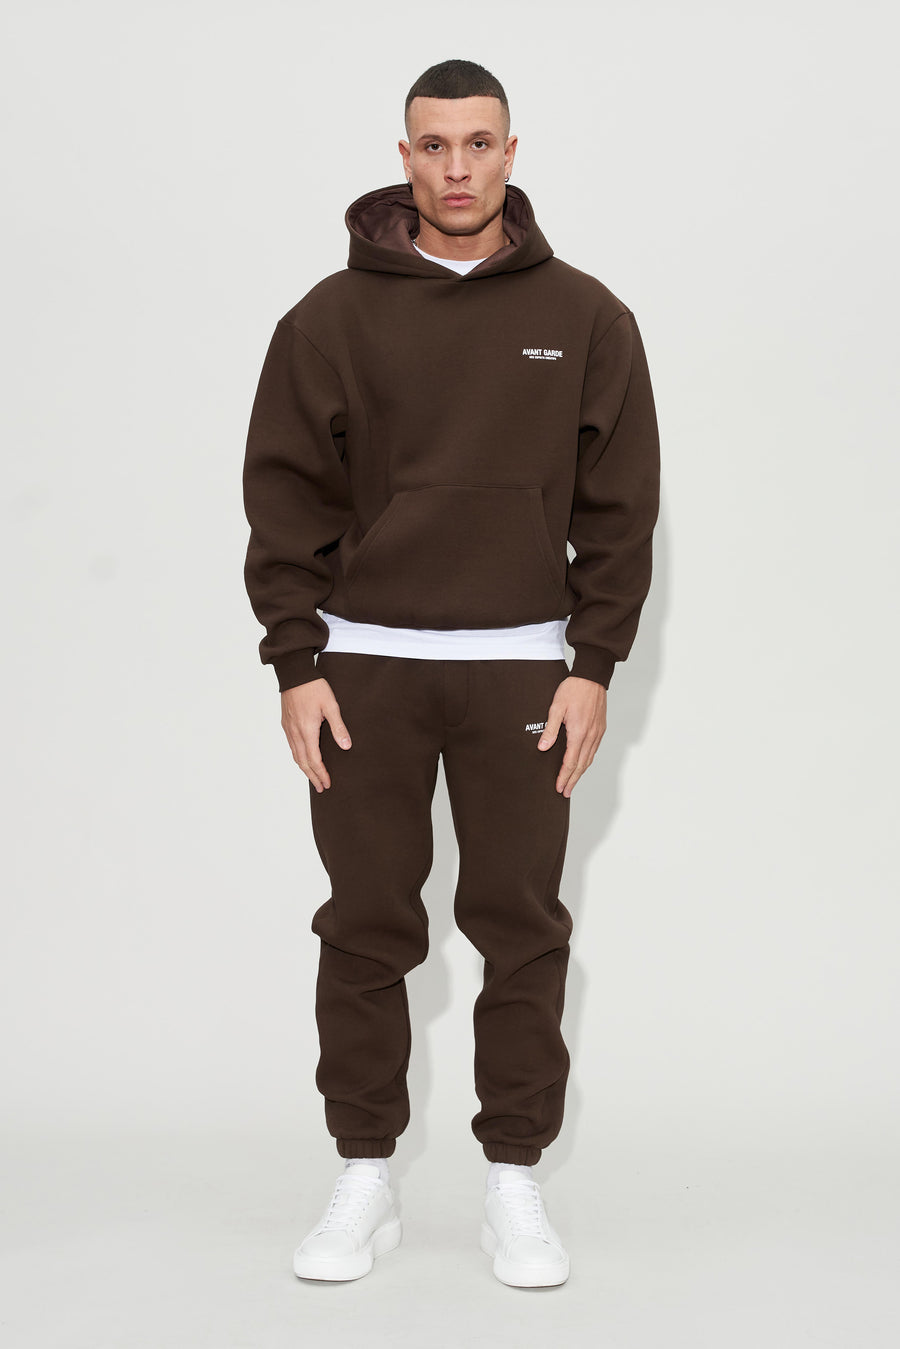 Model wearing creatives hoodie and joggers in chocolate